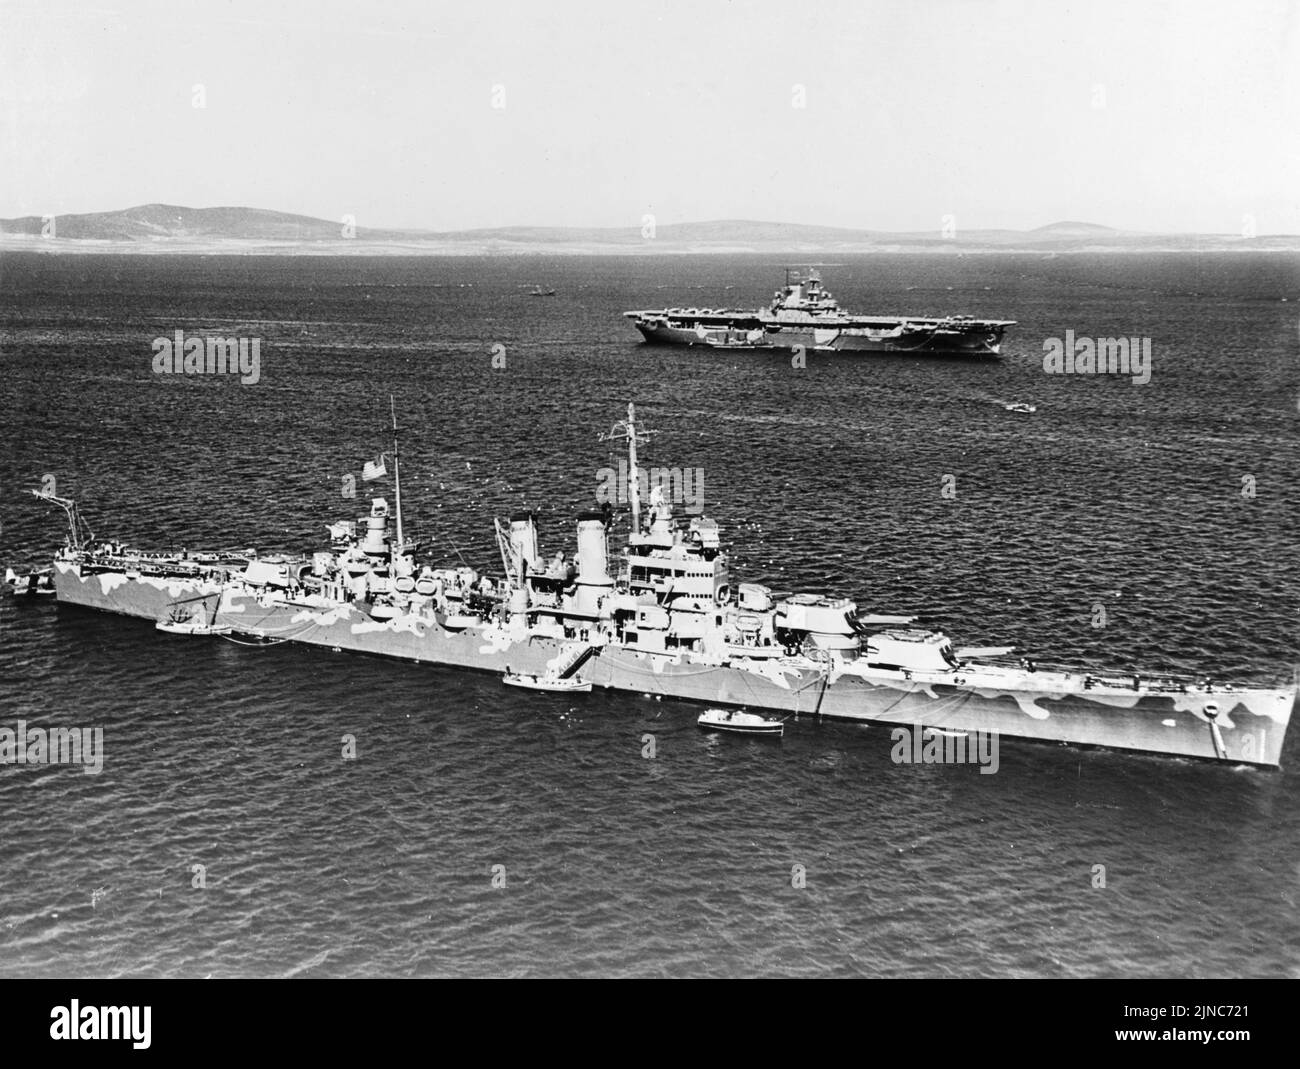 The US aircraft carrier USS Wasp and the heavy cruiser USS Wichita in Scapa Flow. USS Wasp was sunk a few months later after being torpedoed during the invasion of Guadalcanal in September 1942. Stock Photo